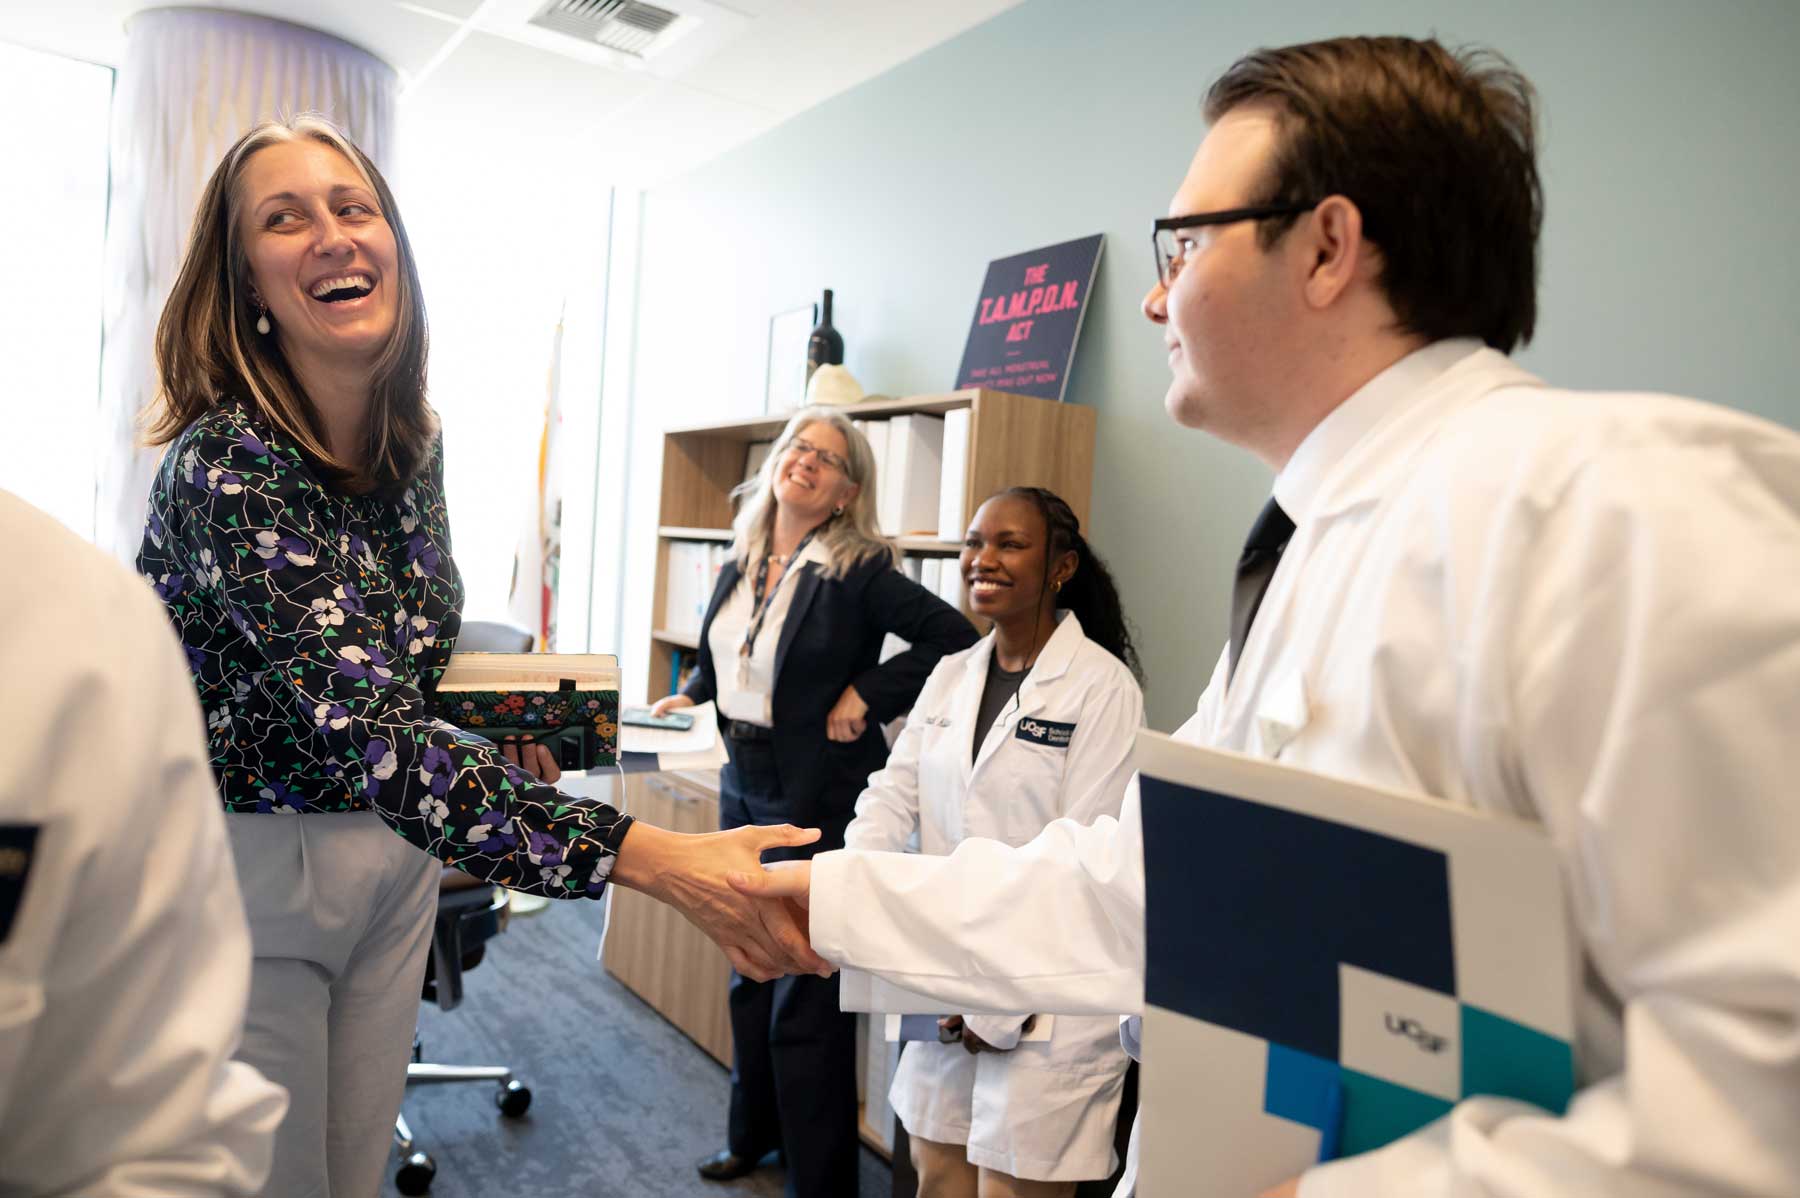 Legislaitve aide Candace Cotton smiles as she shakes hands with UCSF dental student Brice Gentry.